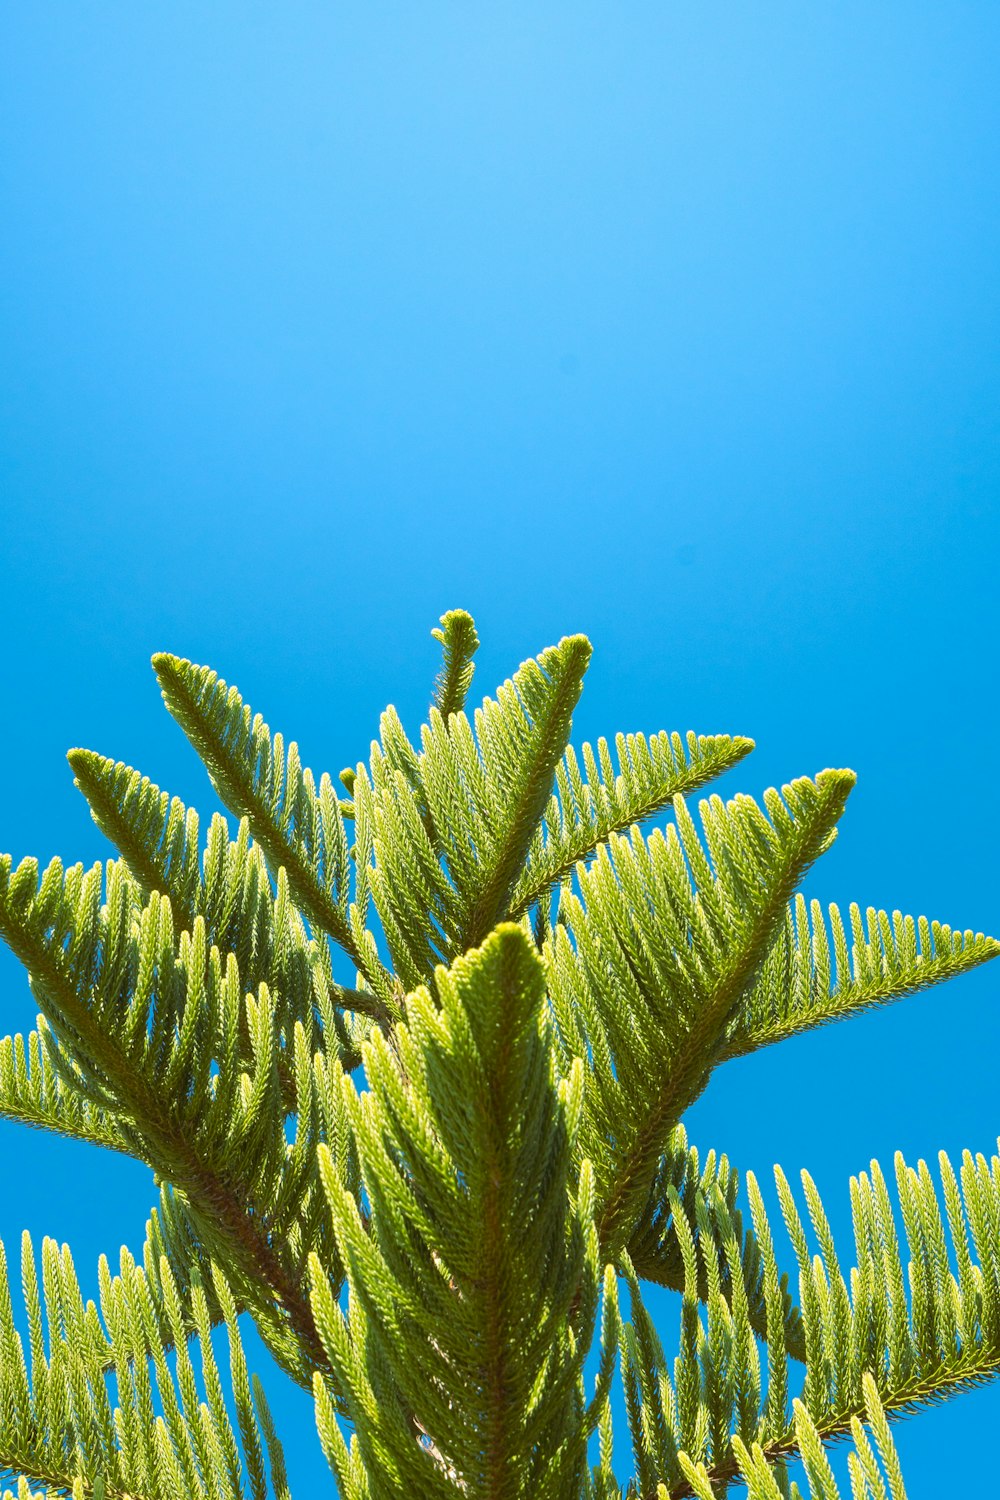 a close up of a tree with a blue sky in the background